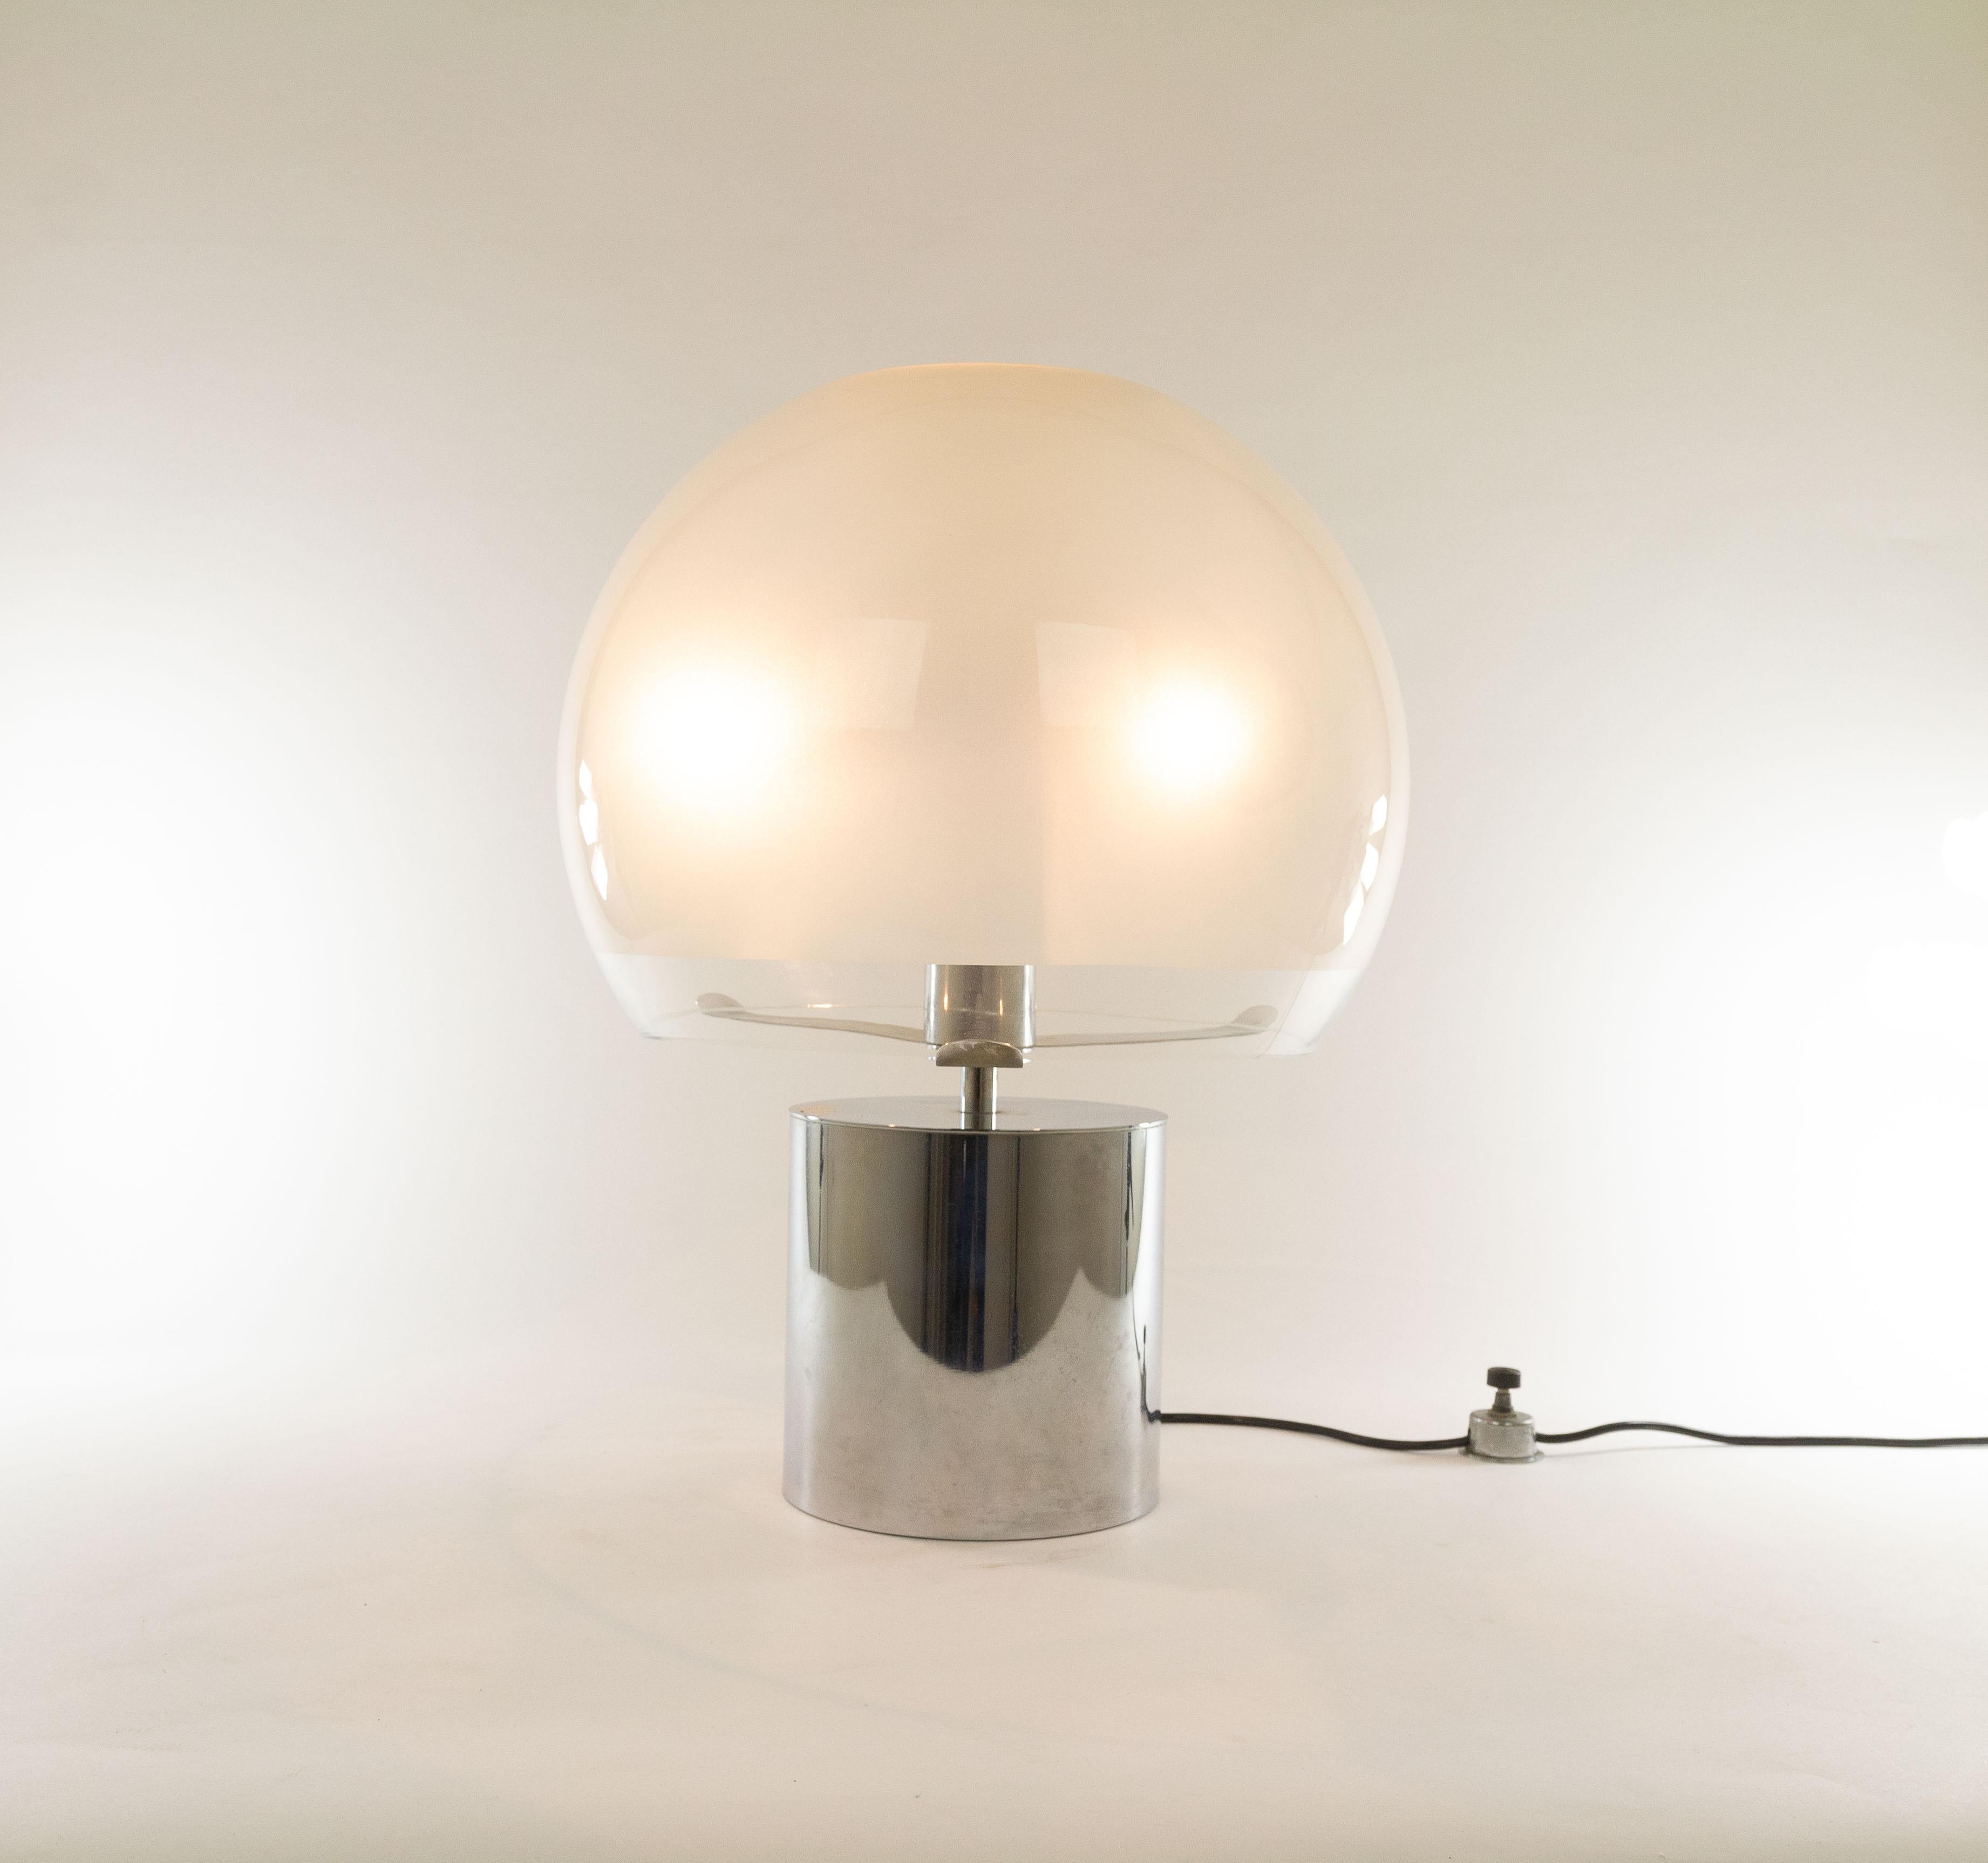 Porcino table or floor lamp designed by Luigi Caccia Dominioni for Azucena, 1966. A timeless classic piece.

The model consists of a cylindrical, silver coloured base, which supports a sphere-like diffuser. The shade, which is made of frosted and